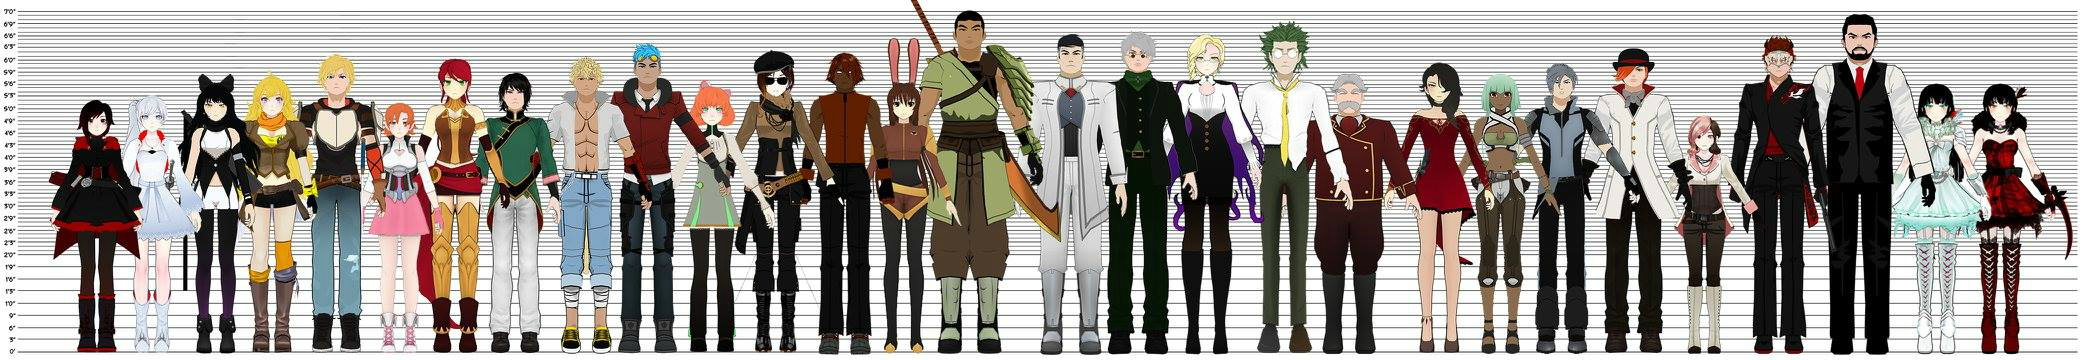 Rwby_height_chart_full.png